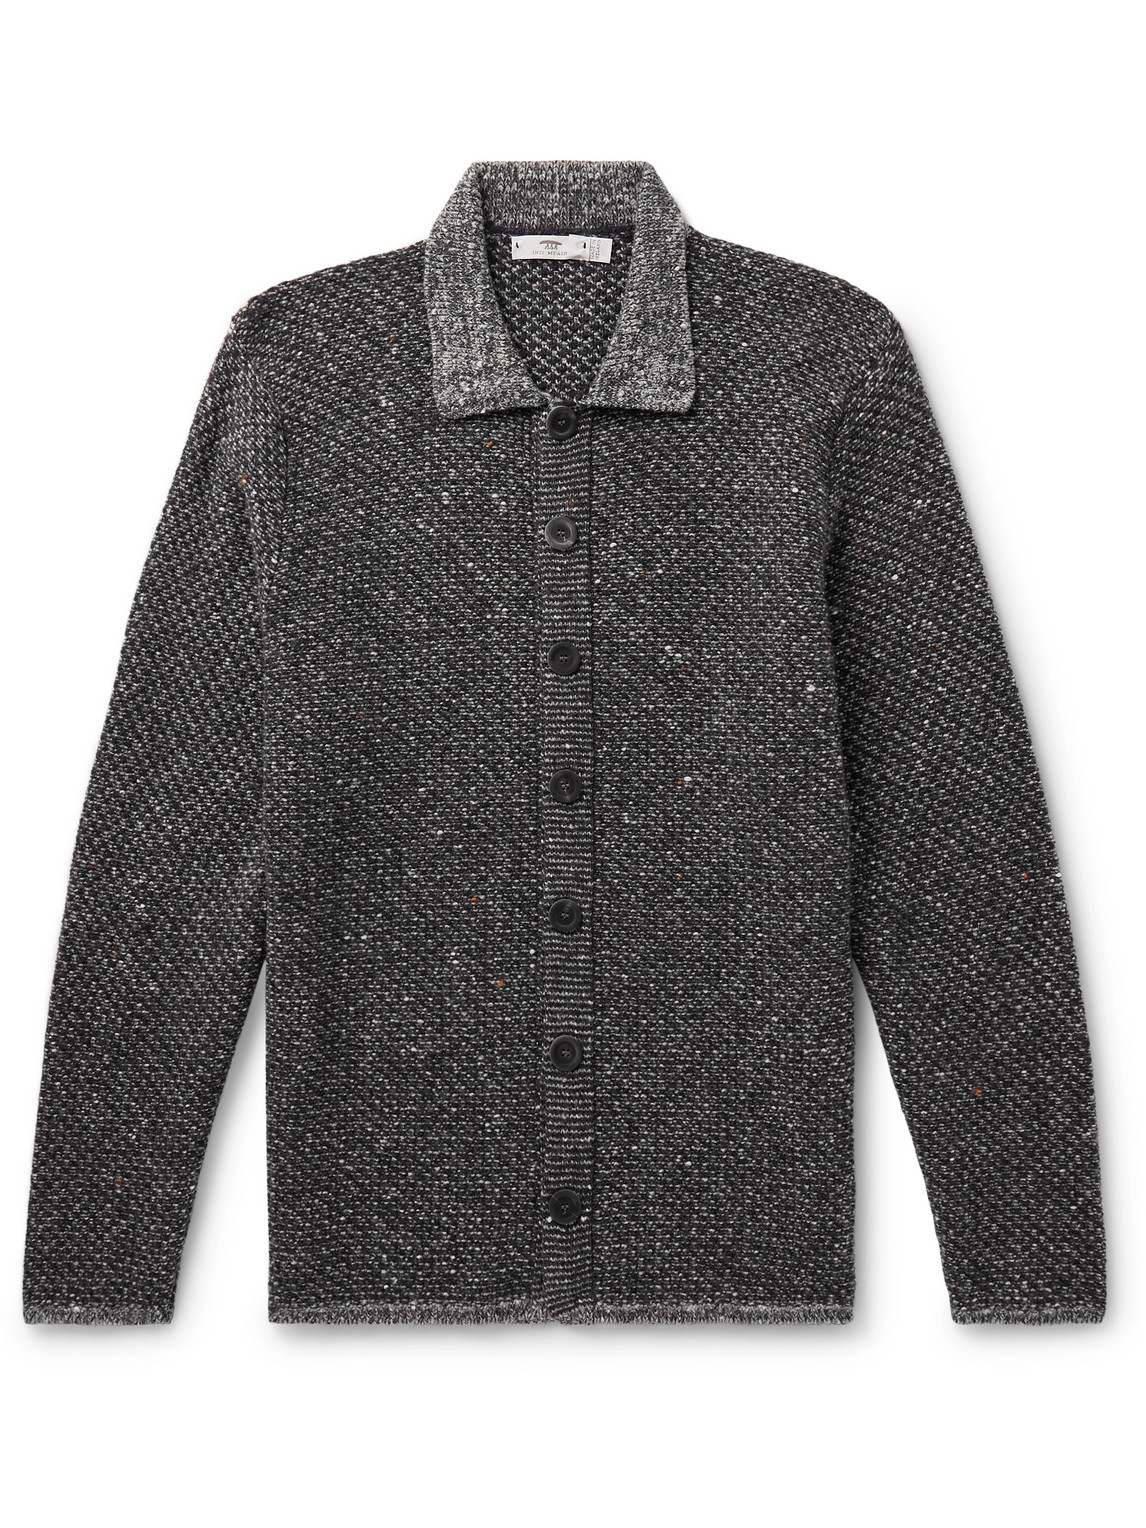 Inis Meáin Donegal Merino Wool and Cashmere-Blend Shirt Jacket